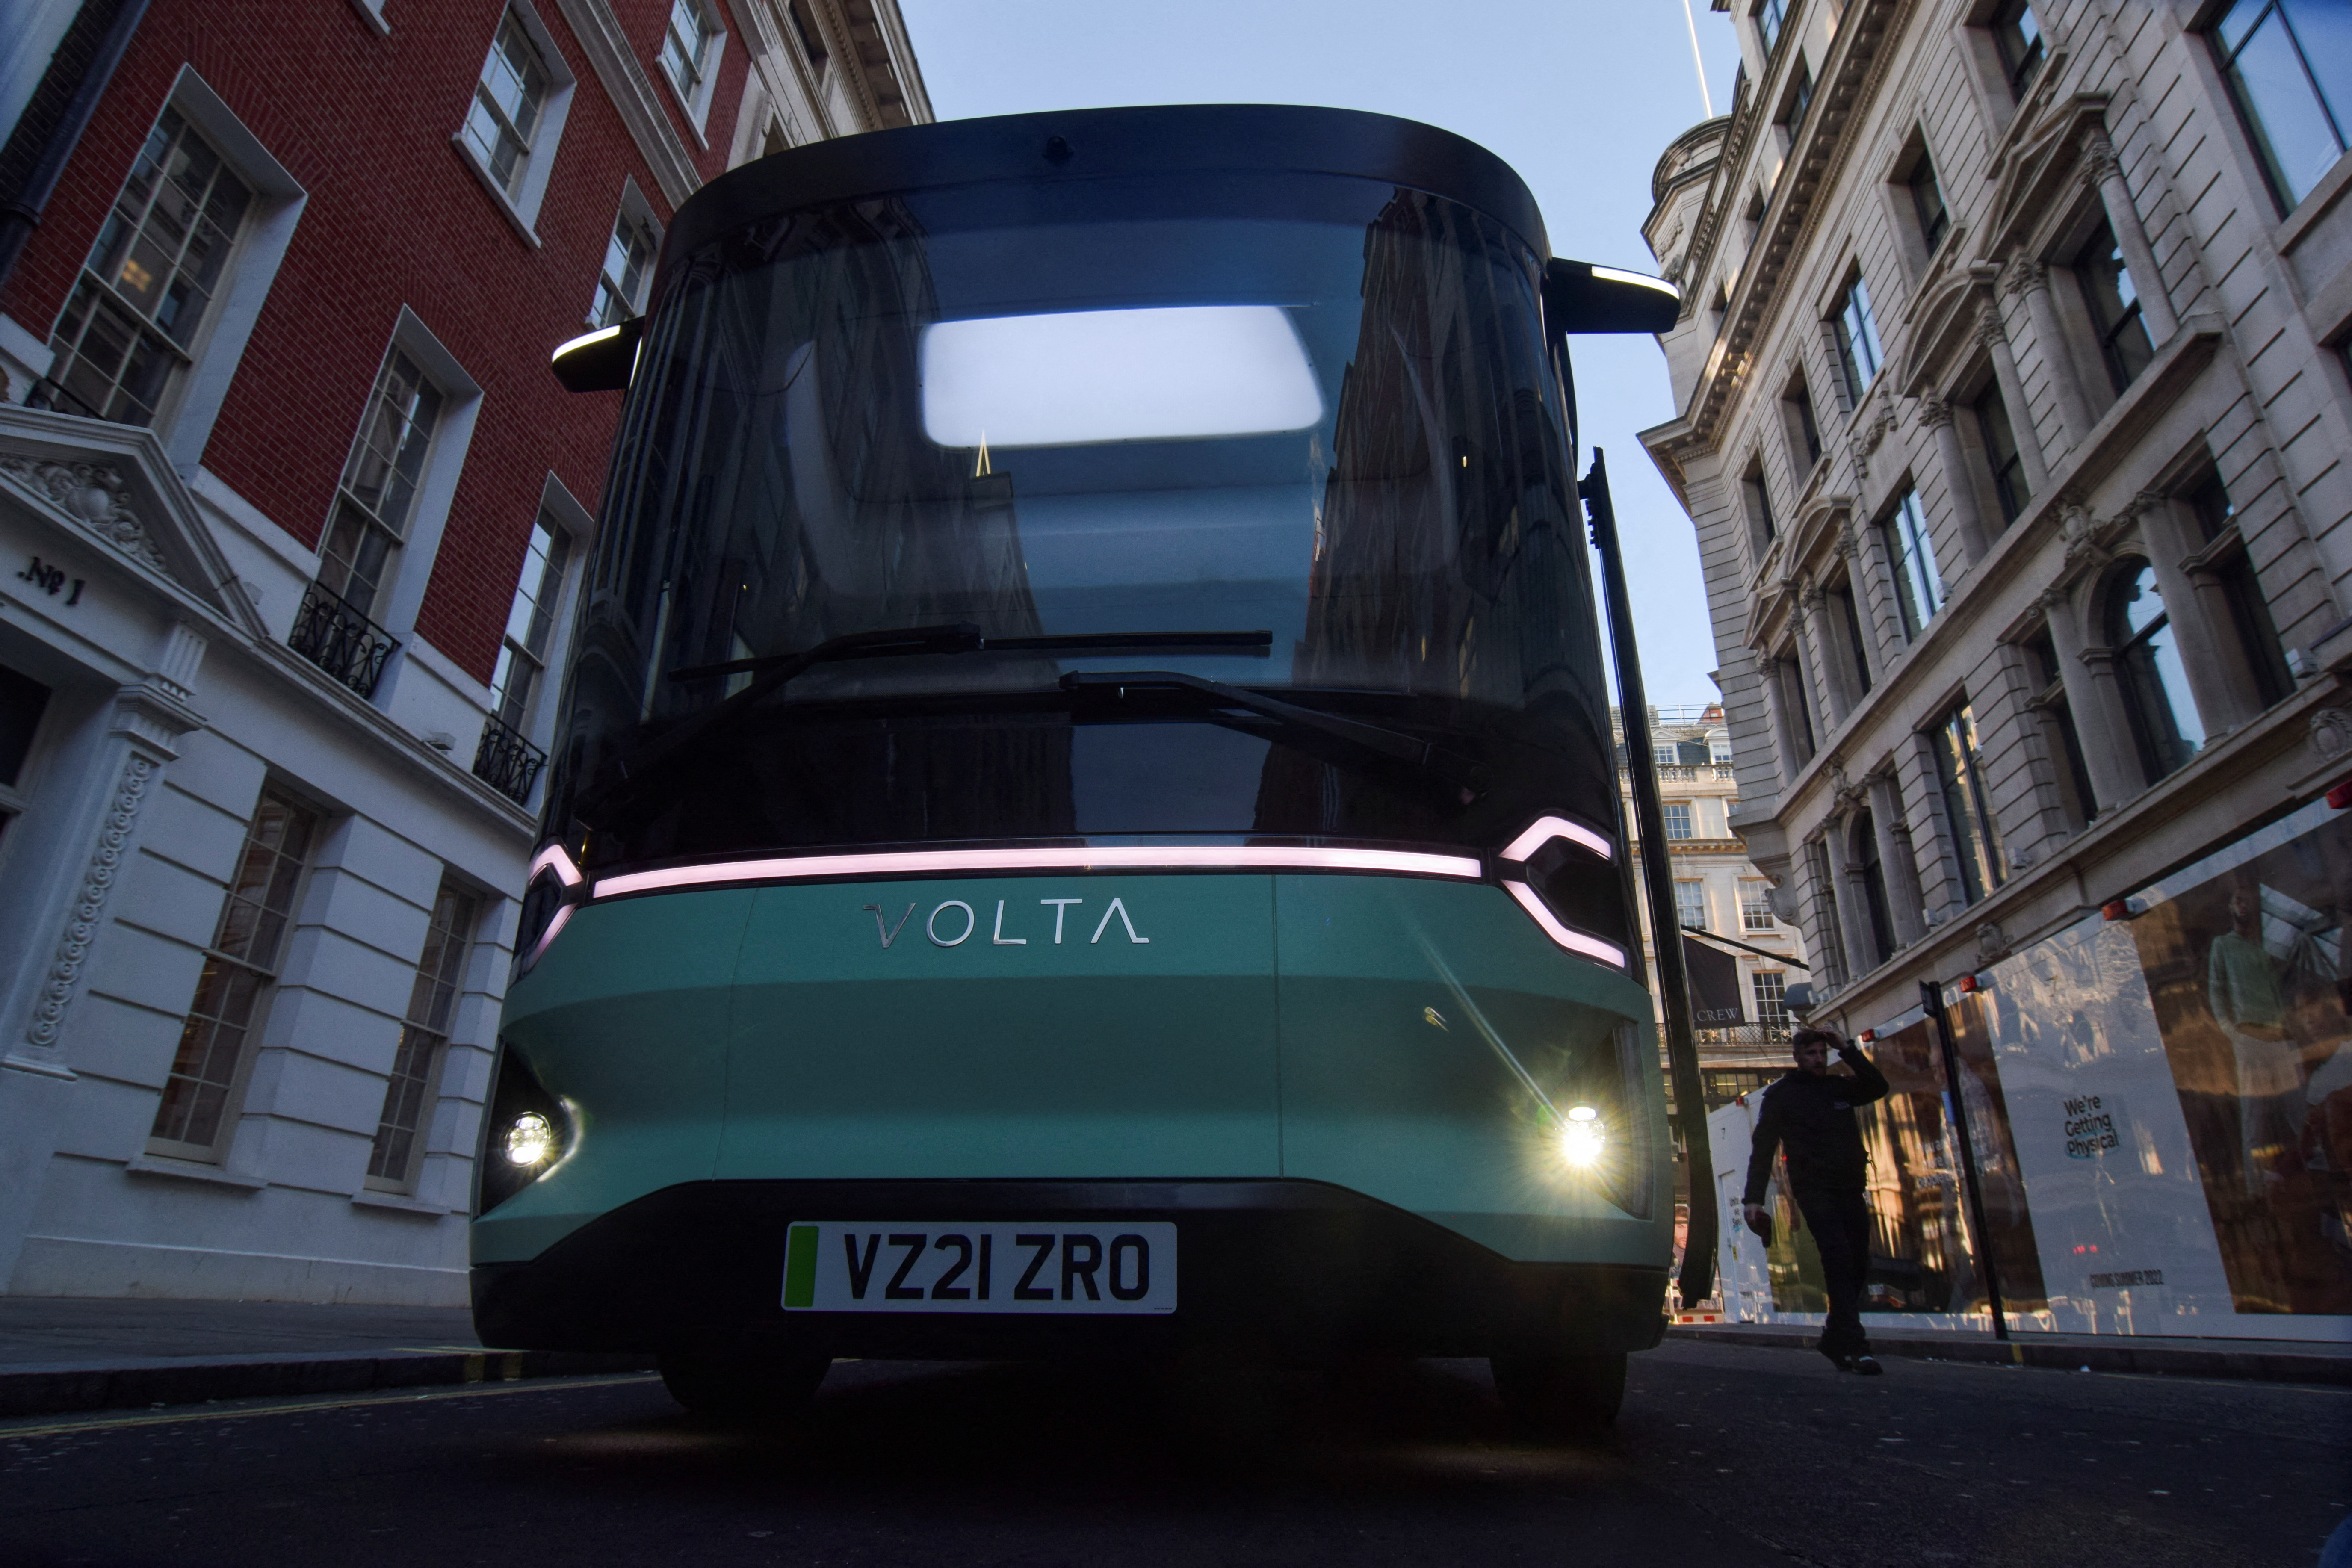 A prototype of the Volta Zero, a 16-tonne electric truck that Volta Trucks will start mass producing in late 2022, is displayed in central London, Britain, January 13, 2022. REUTERS/Nick Carey